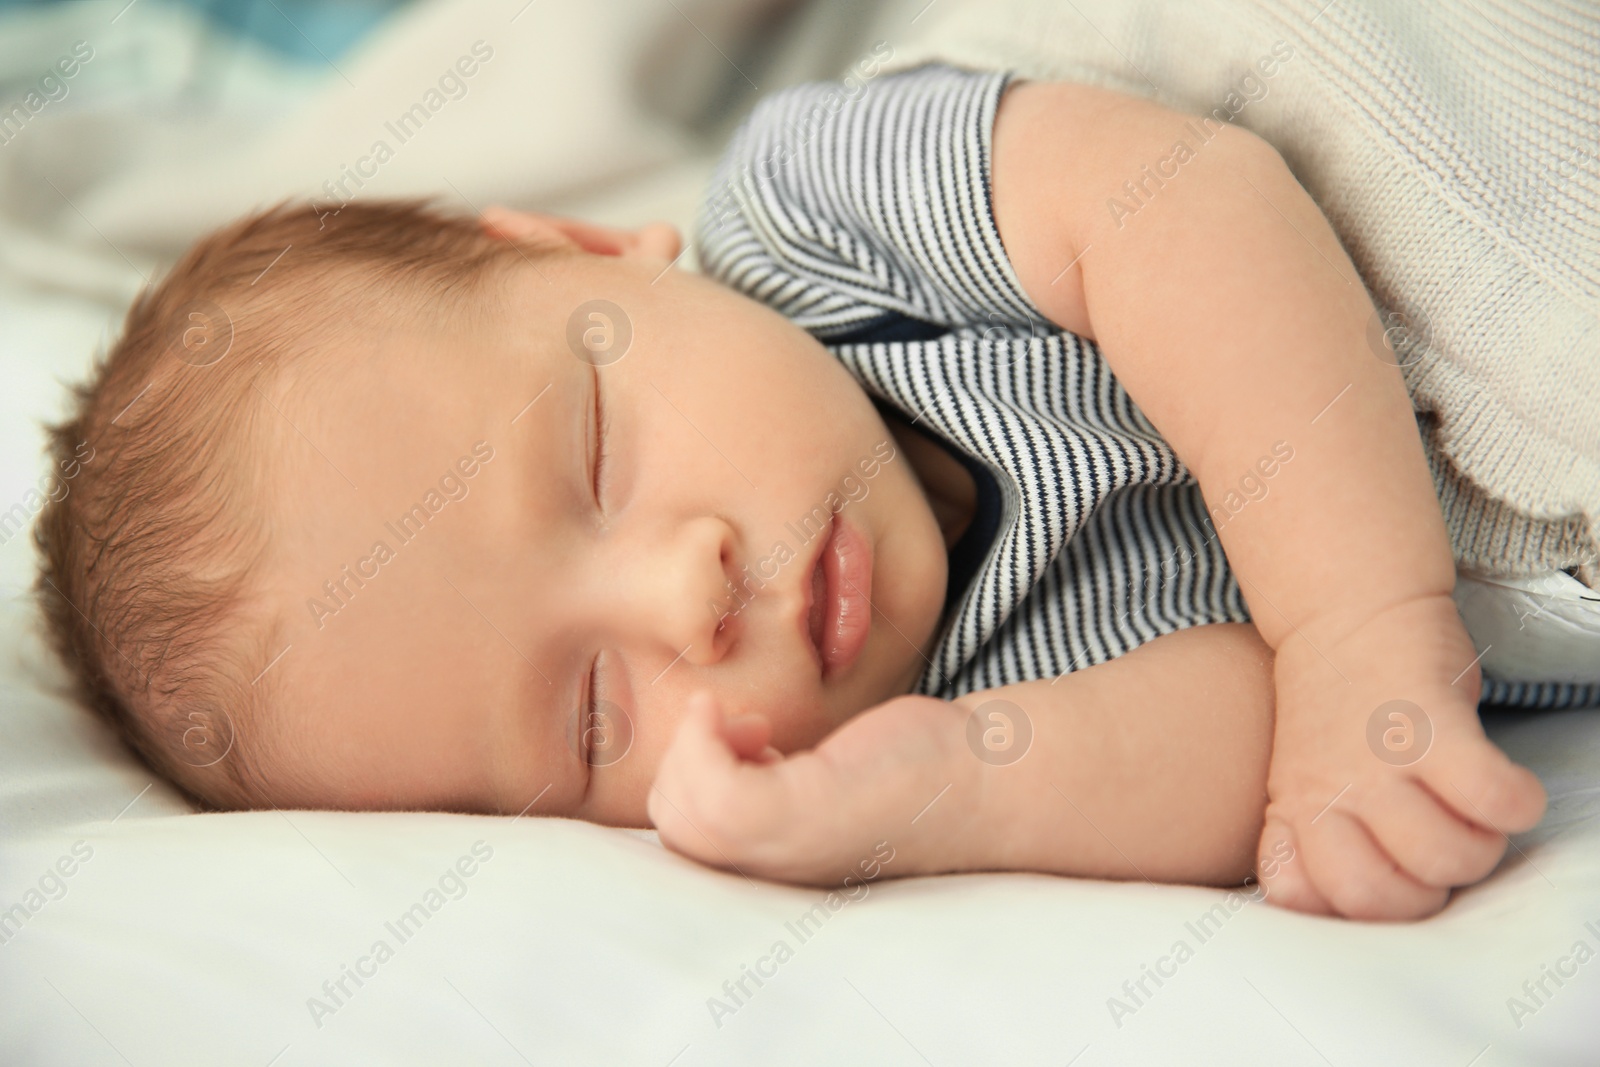 Photo of Adorable newborn baby peacefully sleeping on bed